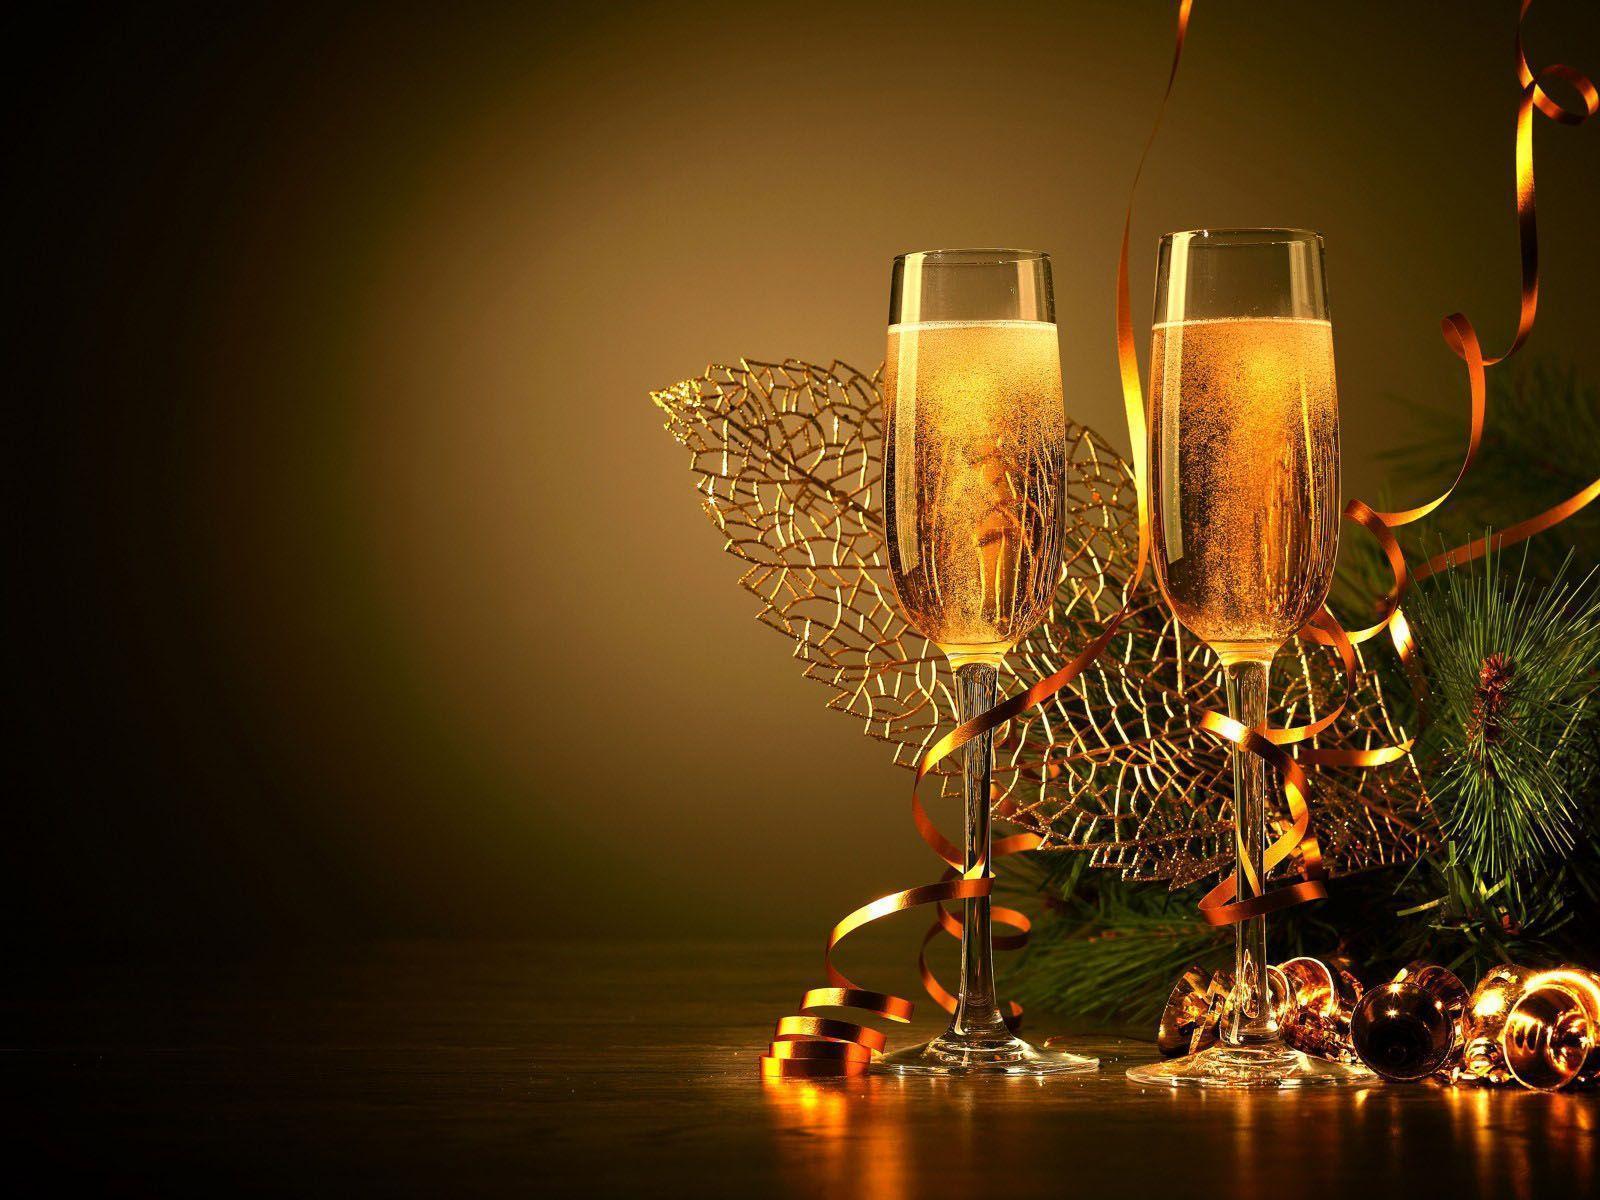 Happy New Year 2015 Desktop Background Wallpaper, Themes